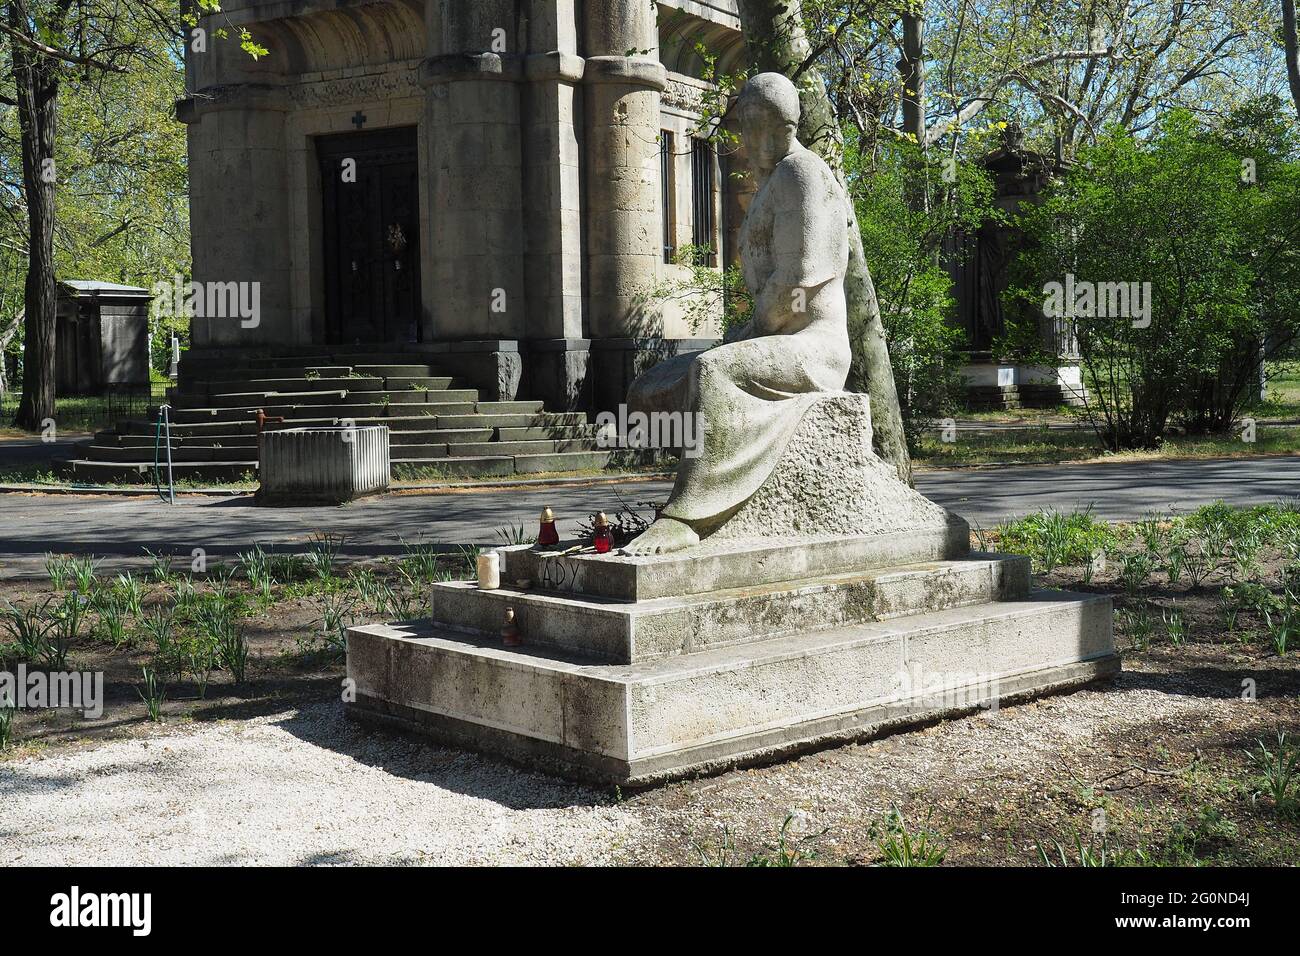 Tomb of Endre (Andrew) Ady (poet), Kerepesi Cemetery (Fiume Road National Graveyard), 8th District, Budapest, Hungary, Magyarország, Europe Stock Photo